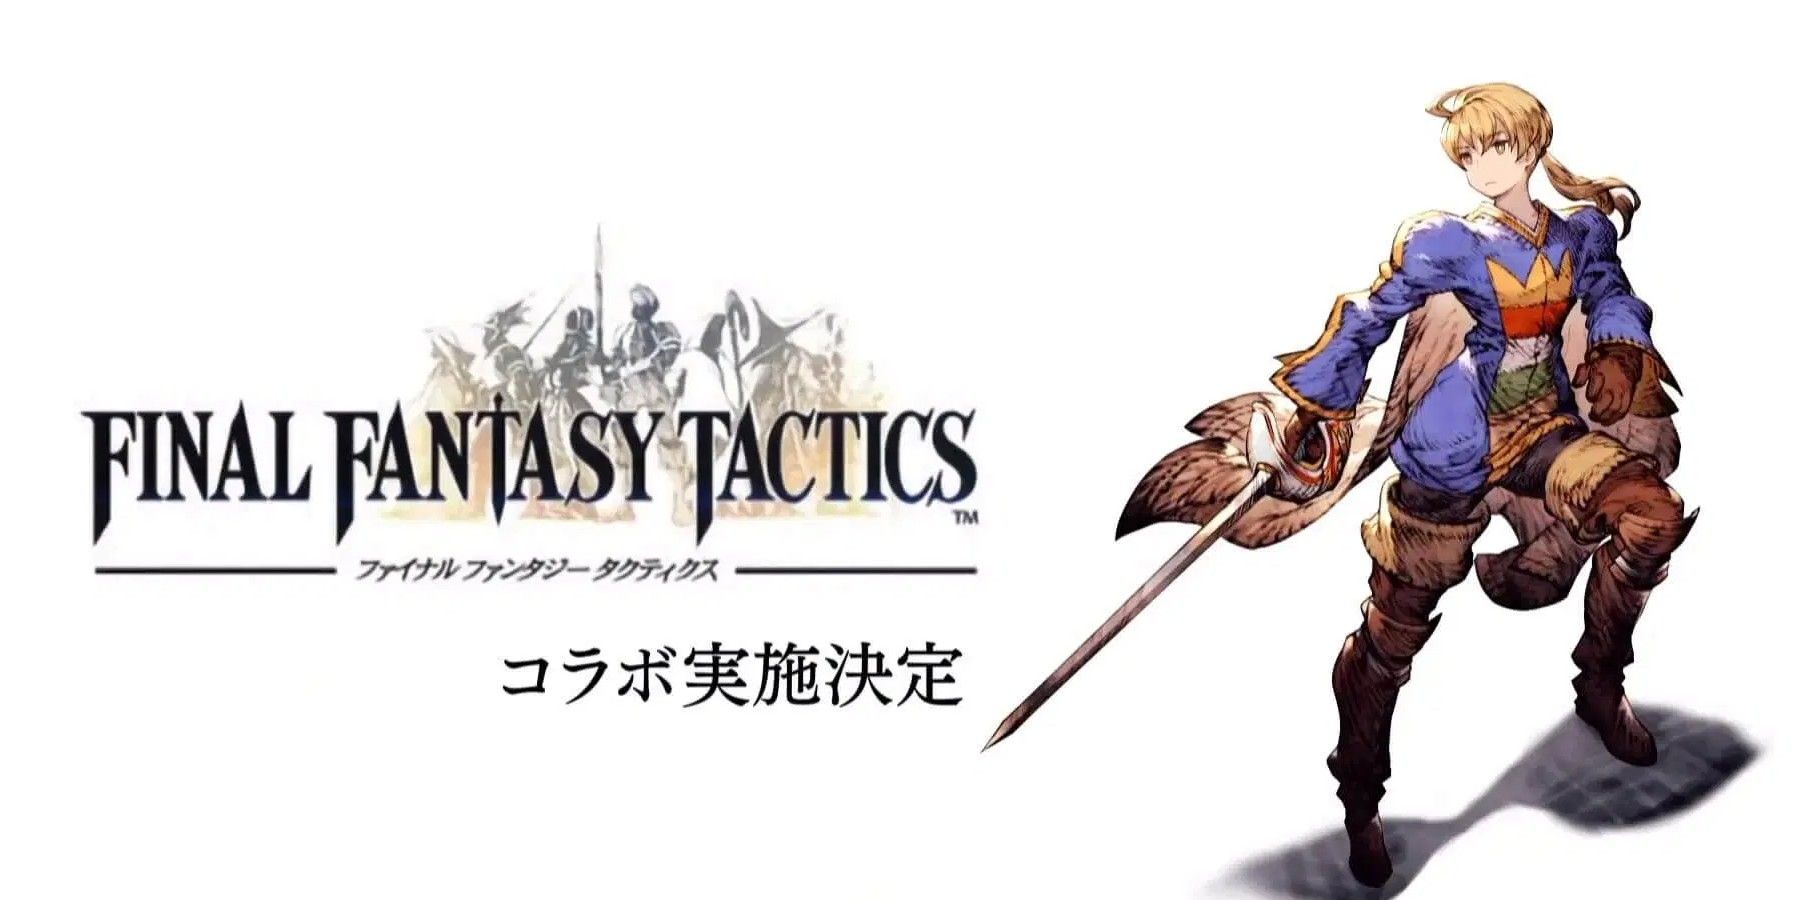 All the Evidence That Final Fantasy Tactics Remaster May Exist